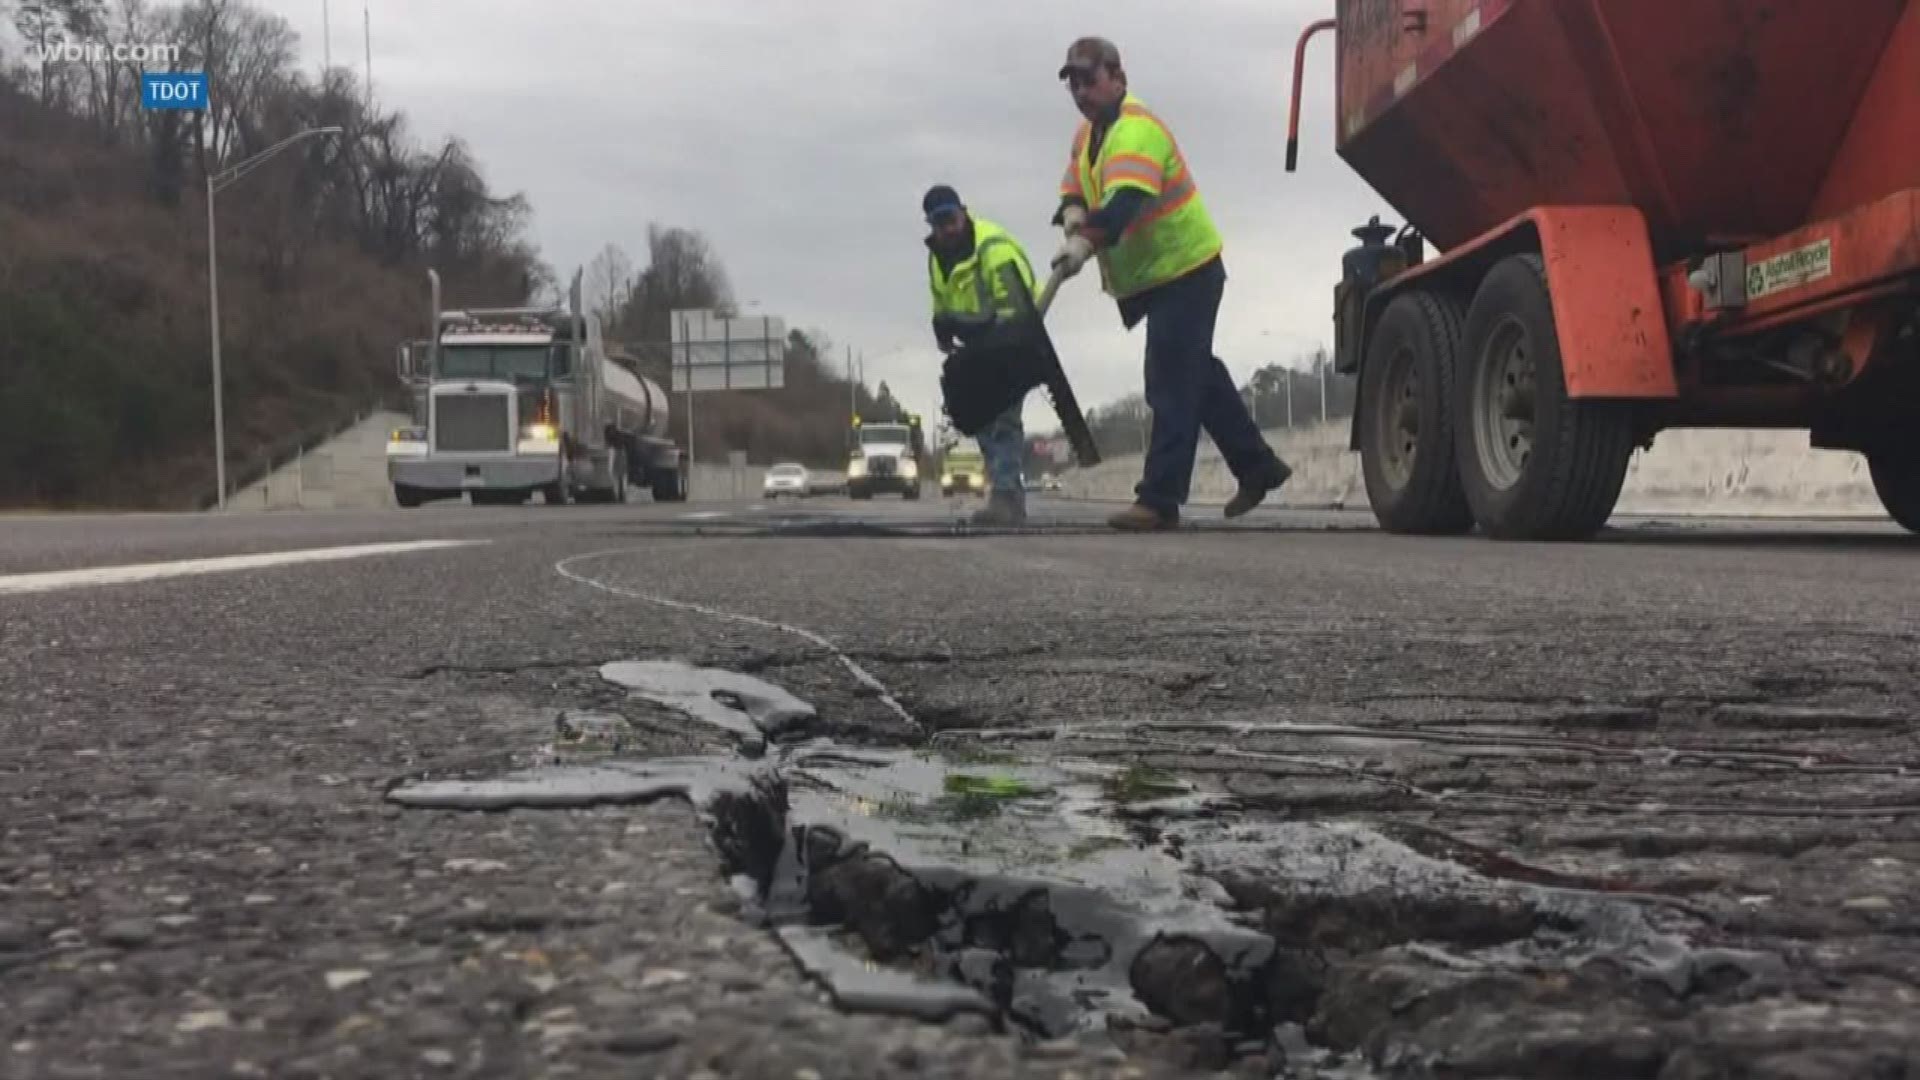 AAA says potholes can cost $250-$1000 dollars in damage to your vehicle, and they're worse than ever in the winter months. How do you avoid them?